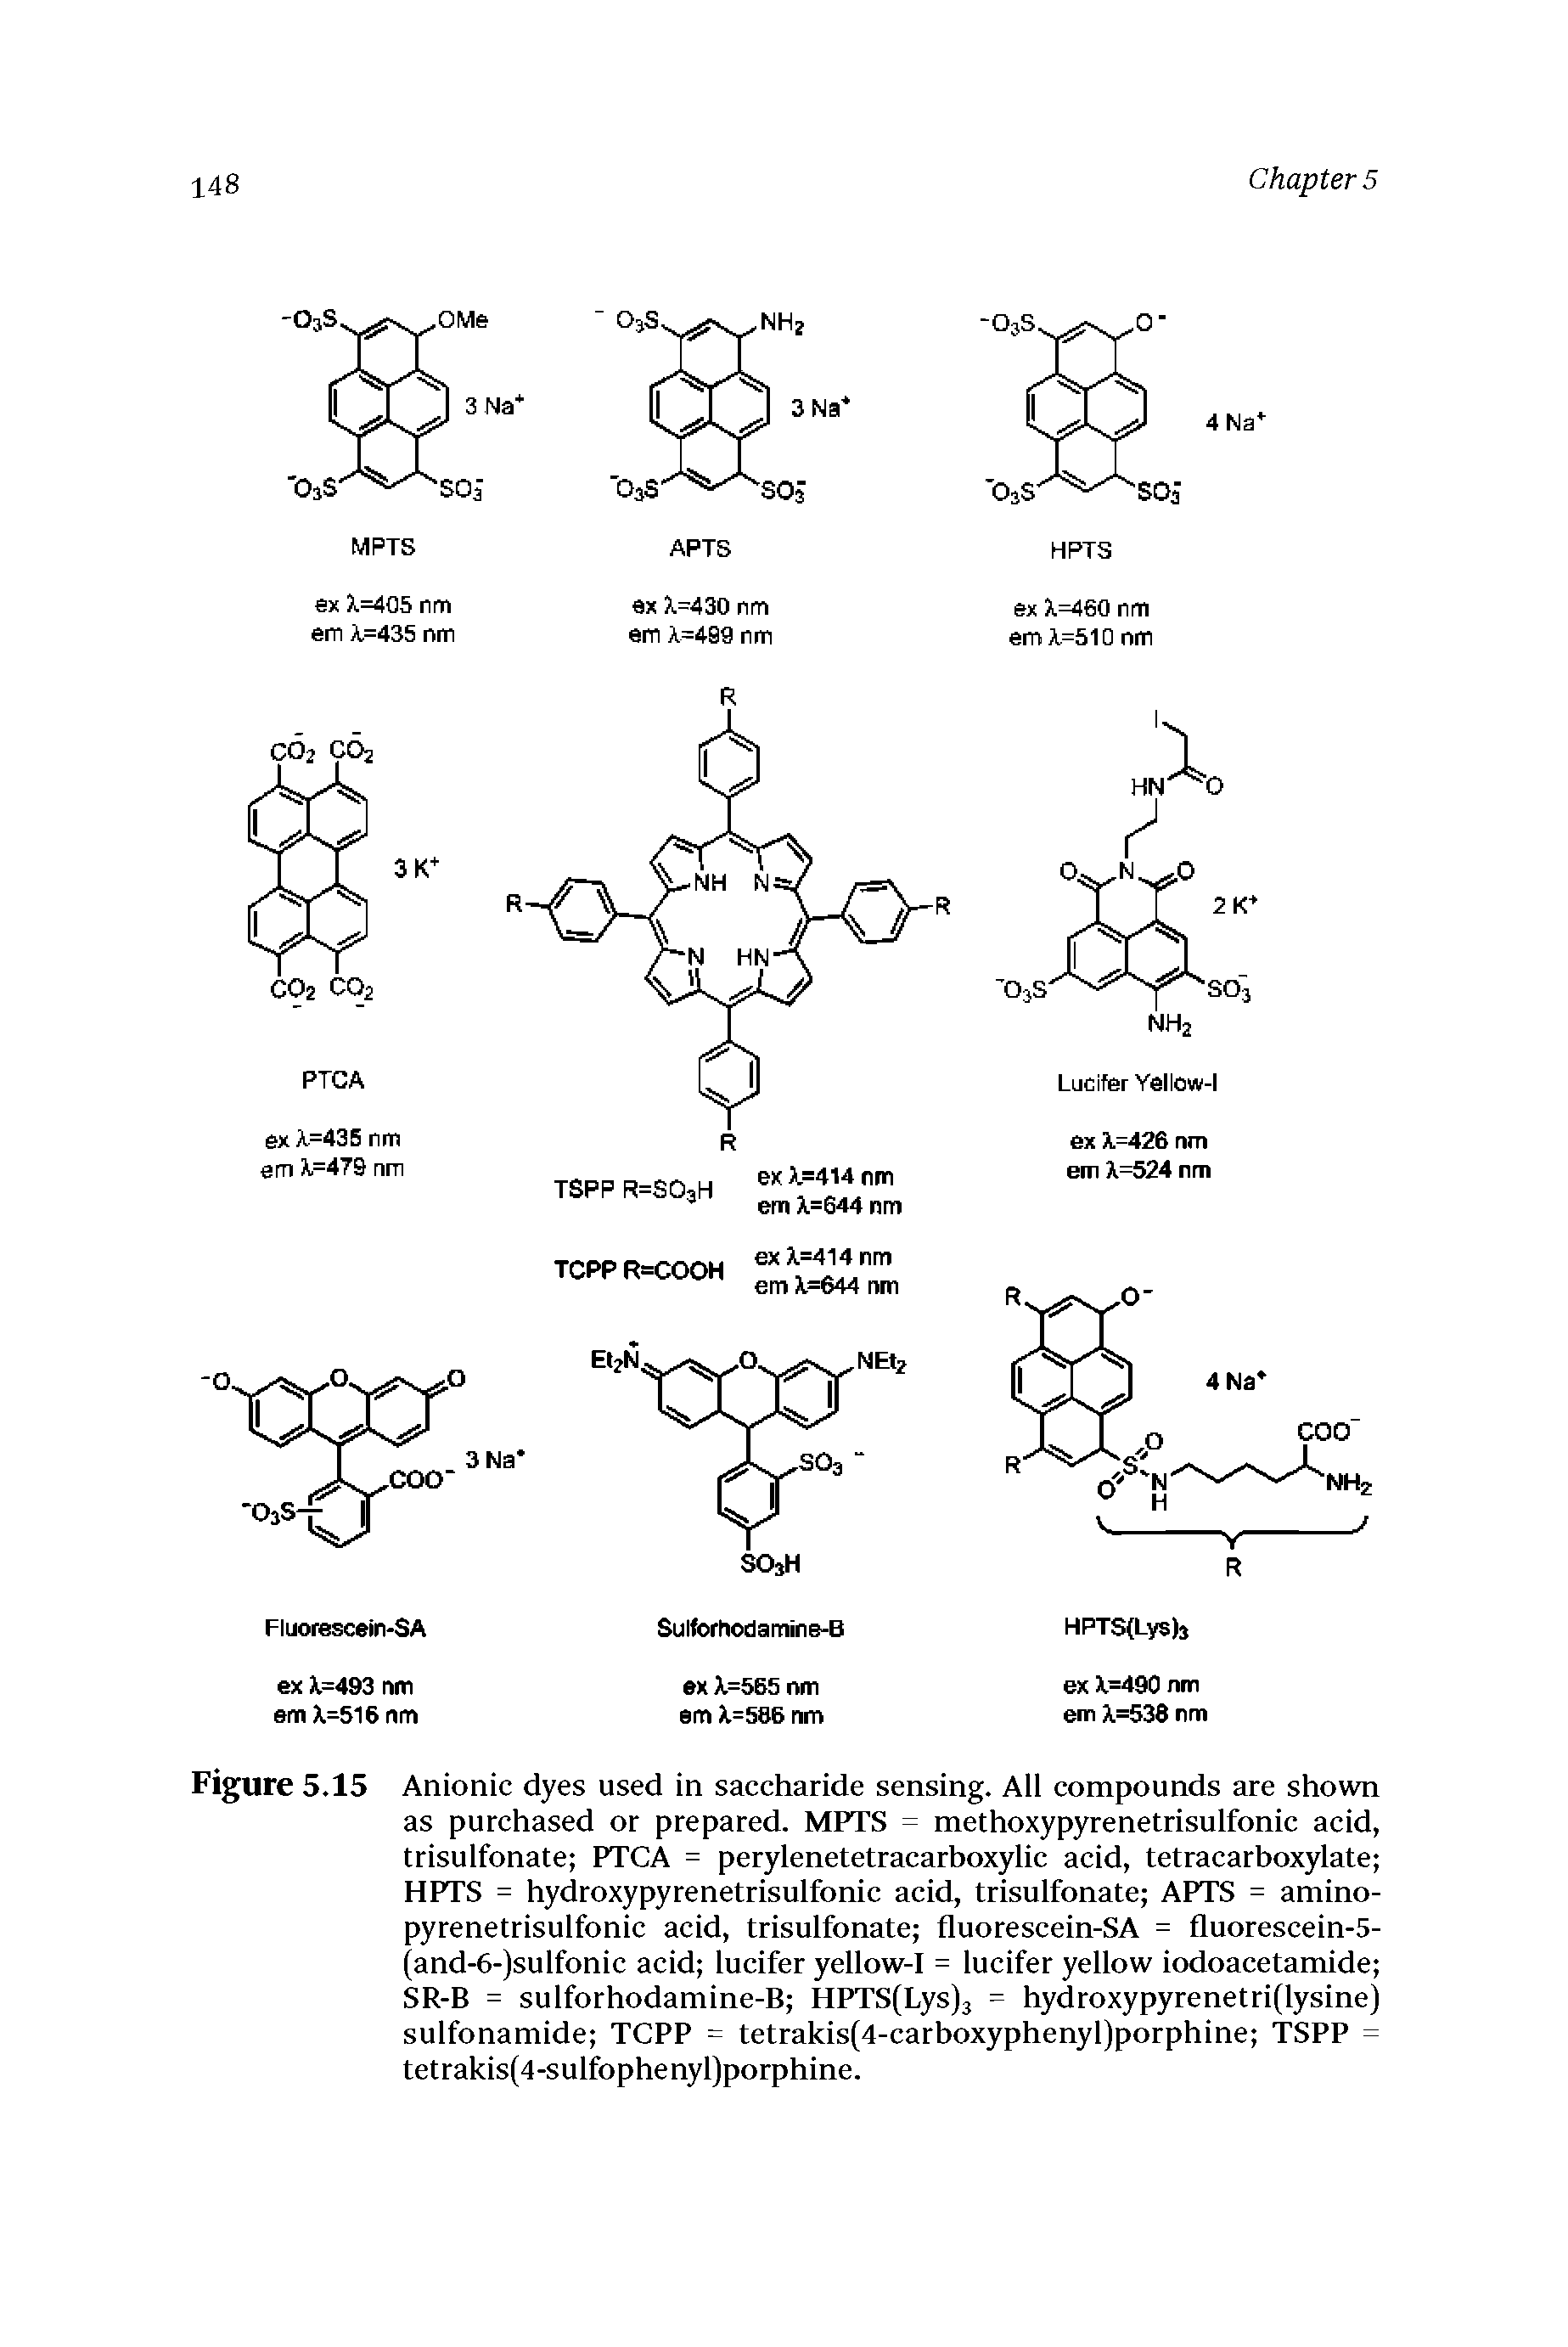 Figure 5.15 Anionic dyes used in saccharide sensing. All compounds are shown as purchased or prepared. MPTS = methoxypyrenetrisulfonic acid, trisulfonate PTCA = perylenetetracarboxylic acid, tetracarboxylate HPTS = hydroxypyrenetrisulfonic acid, trisulfonate APTS = amino-pyrenetrisulfonic acid, trisulfonate fluorescein-SA = fluorescein-5-(and-6-)sulfonic acid lucifer yellow-I = lucifer yellow iodoacetamide SR-B = sulforhodamine-B HPTS(Lys)3 = hydroxypyrenetri(lysine) sulfonamide TCPP = tetrakis(4-carboxyphenyl)porphine TSPP = tetrakis(4-sulfophenyl)porphine.